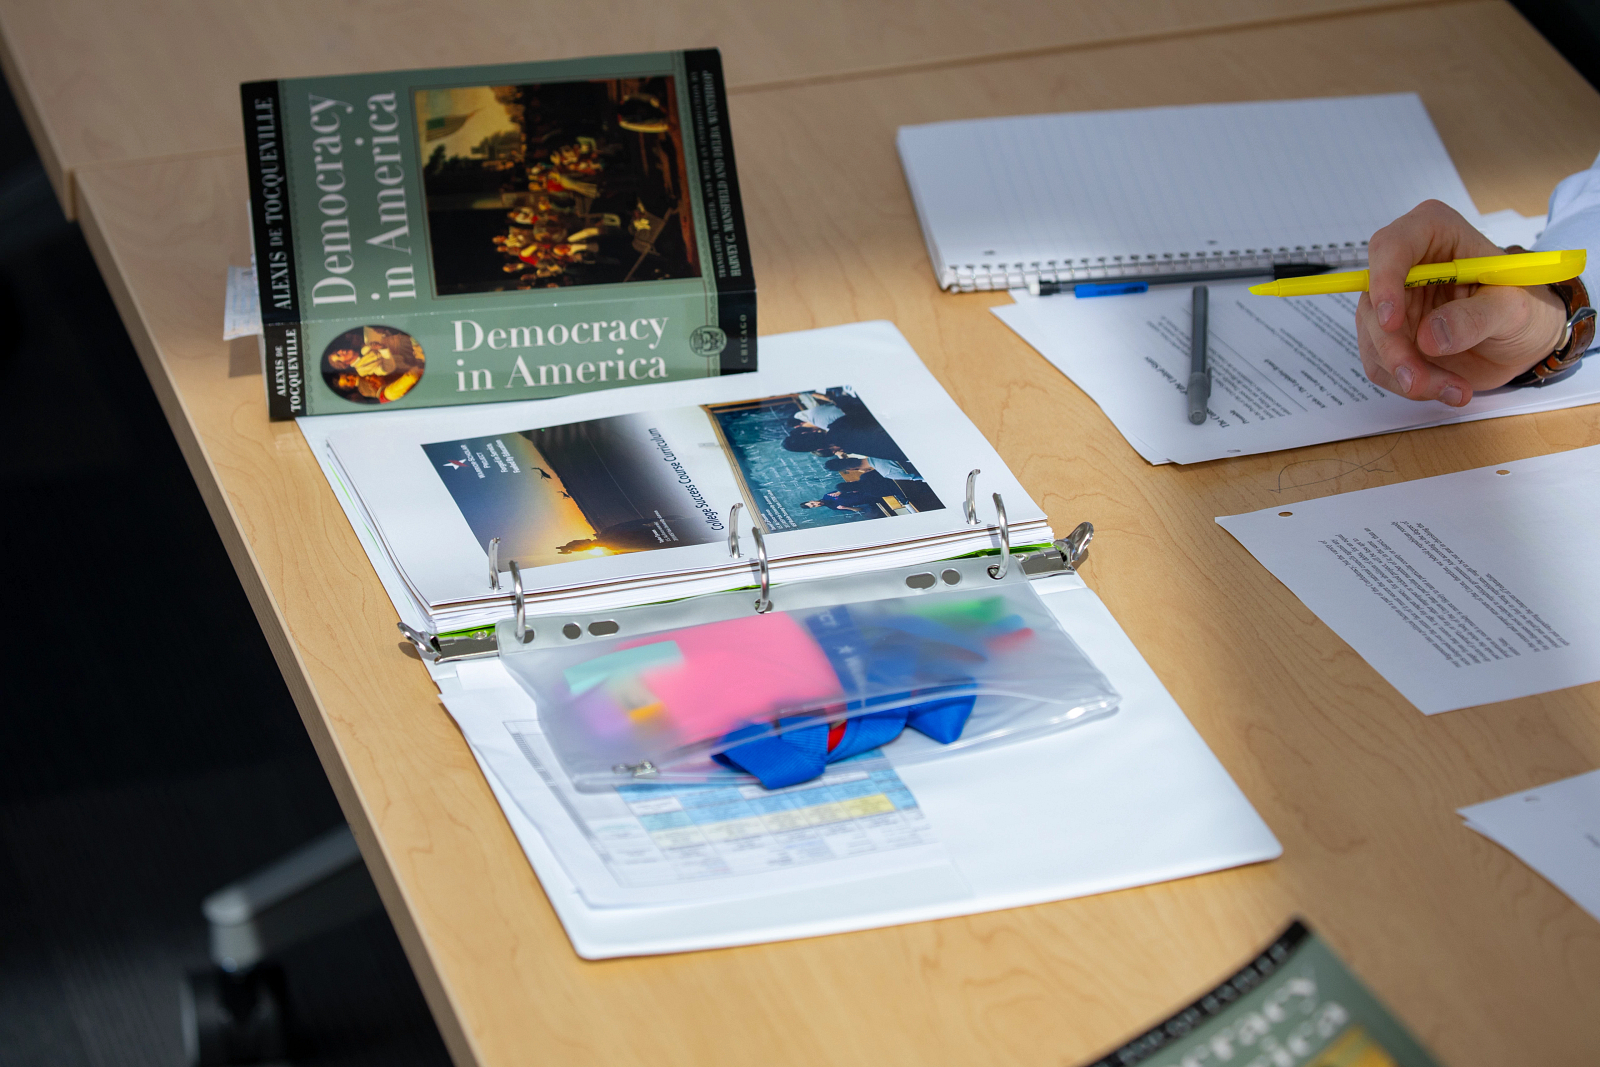 Detail shot of textbook and writing materials